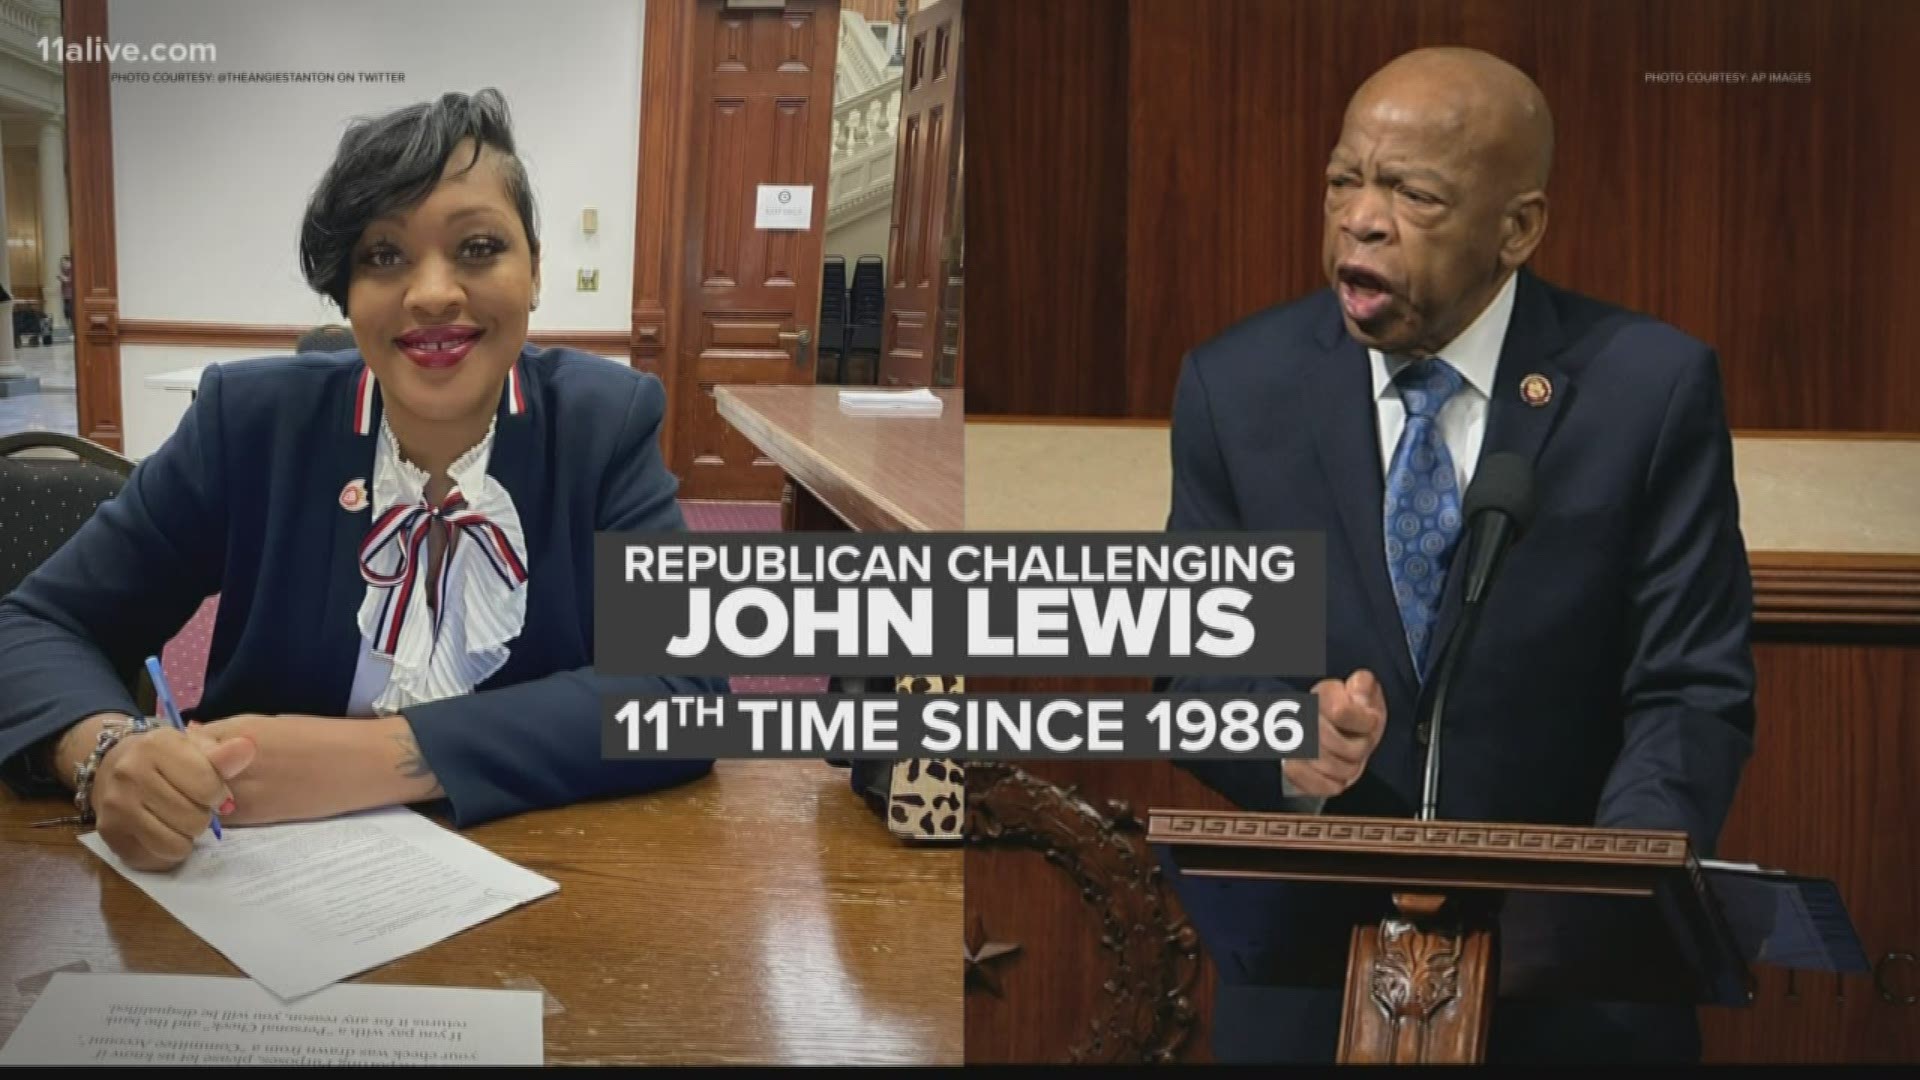 An Atlanta woman pardoned In February by President Donald Trump announced Friday she is running for congress against civil rights icon and Democrat Rep. John Lewis.